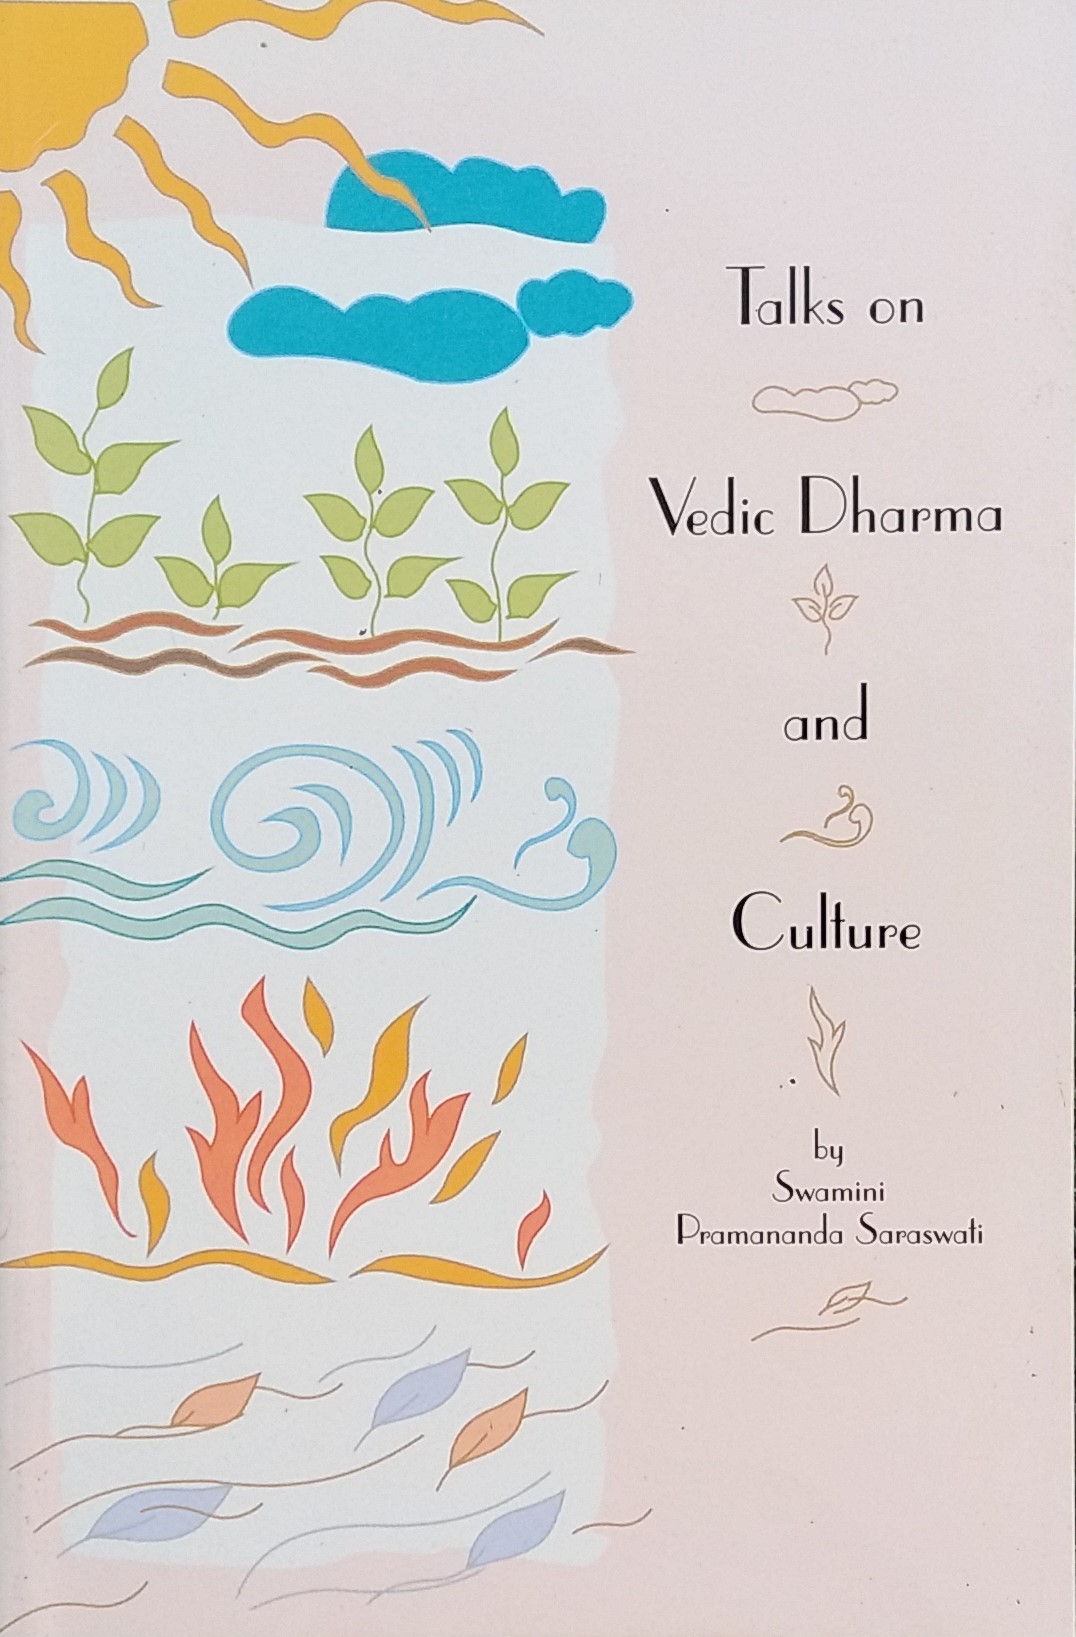 Talks on <br/>Vedic Dharma and Culture